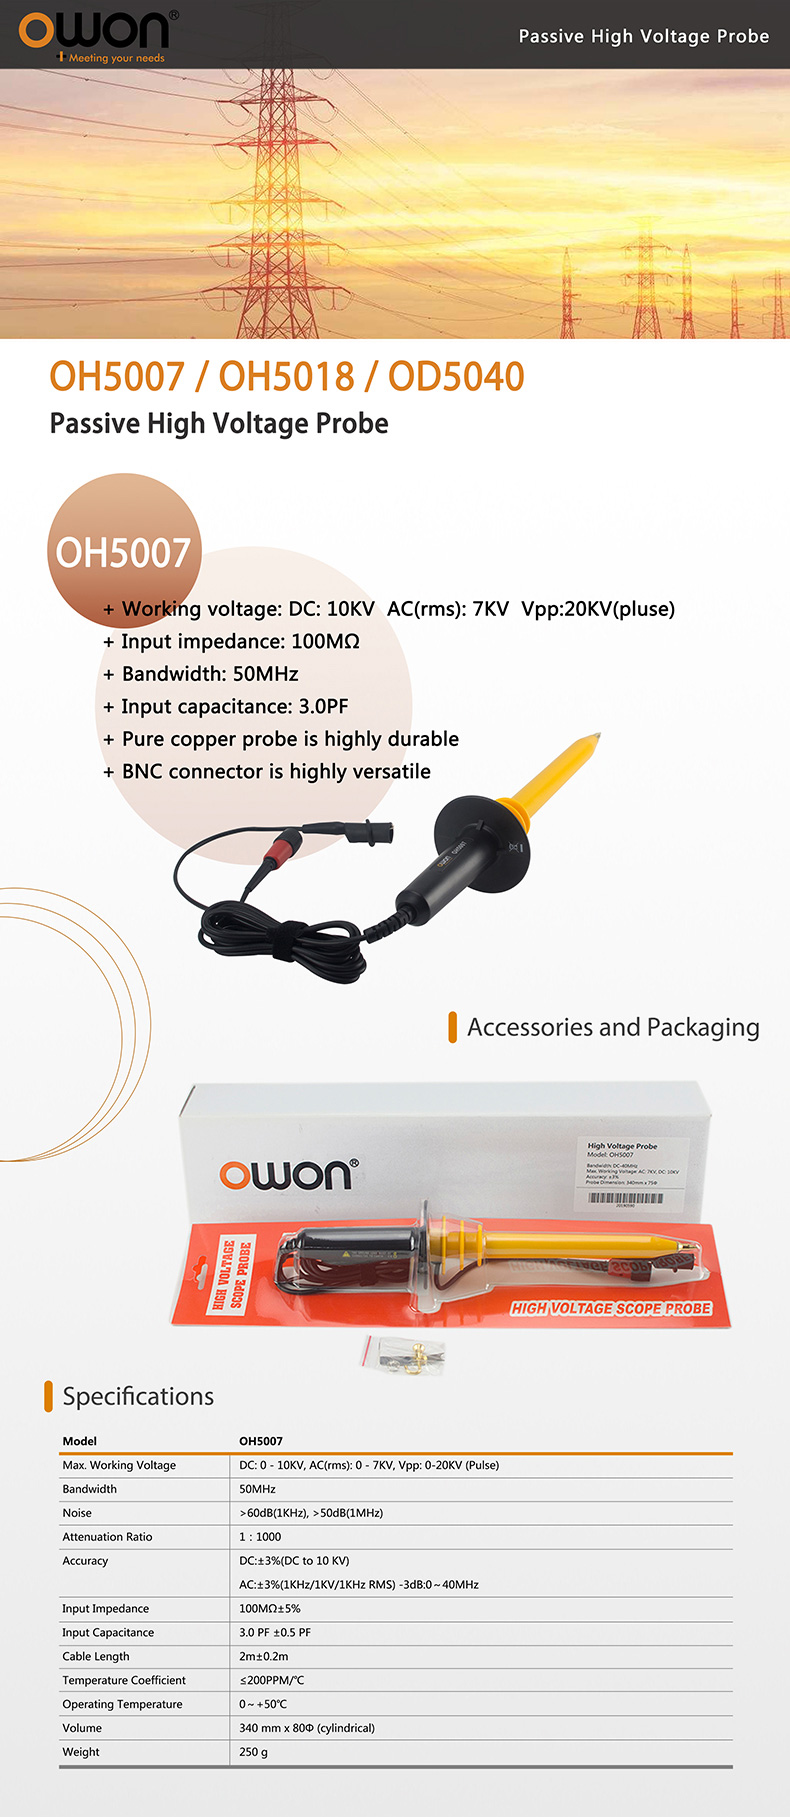 OWON OH5007 Passive High Voltage Probe